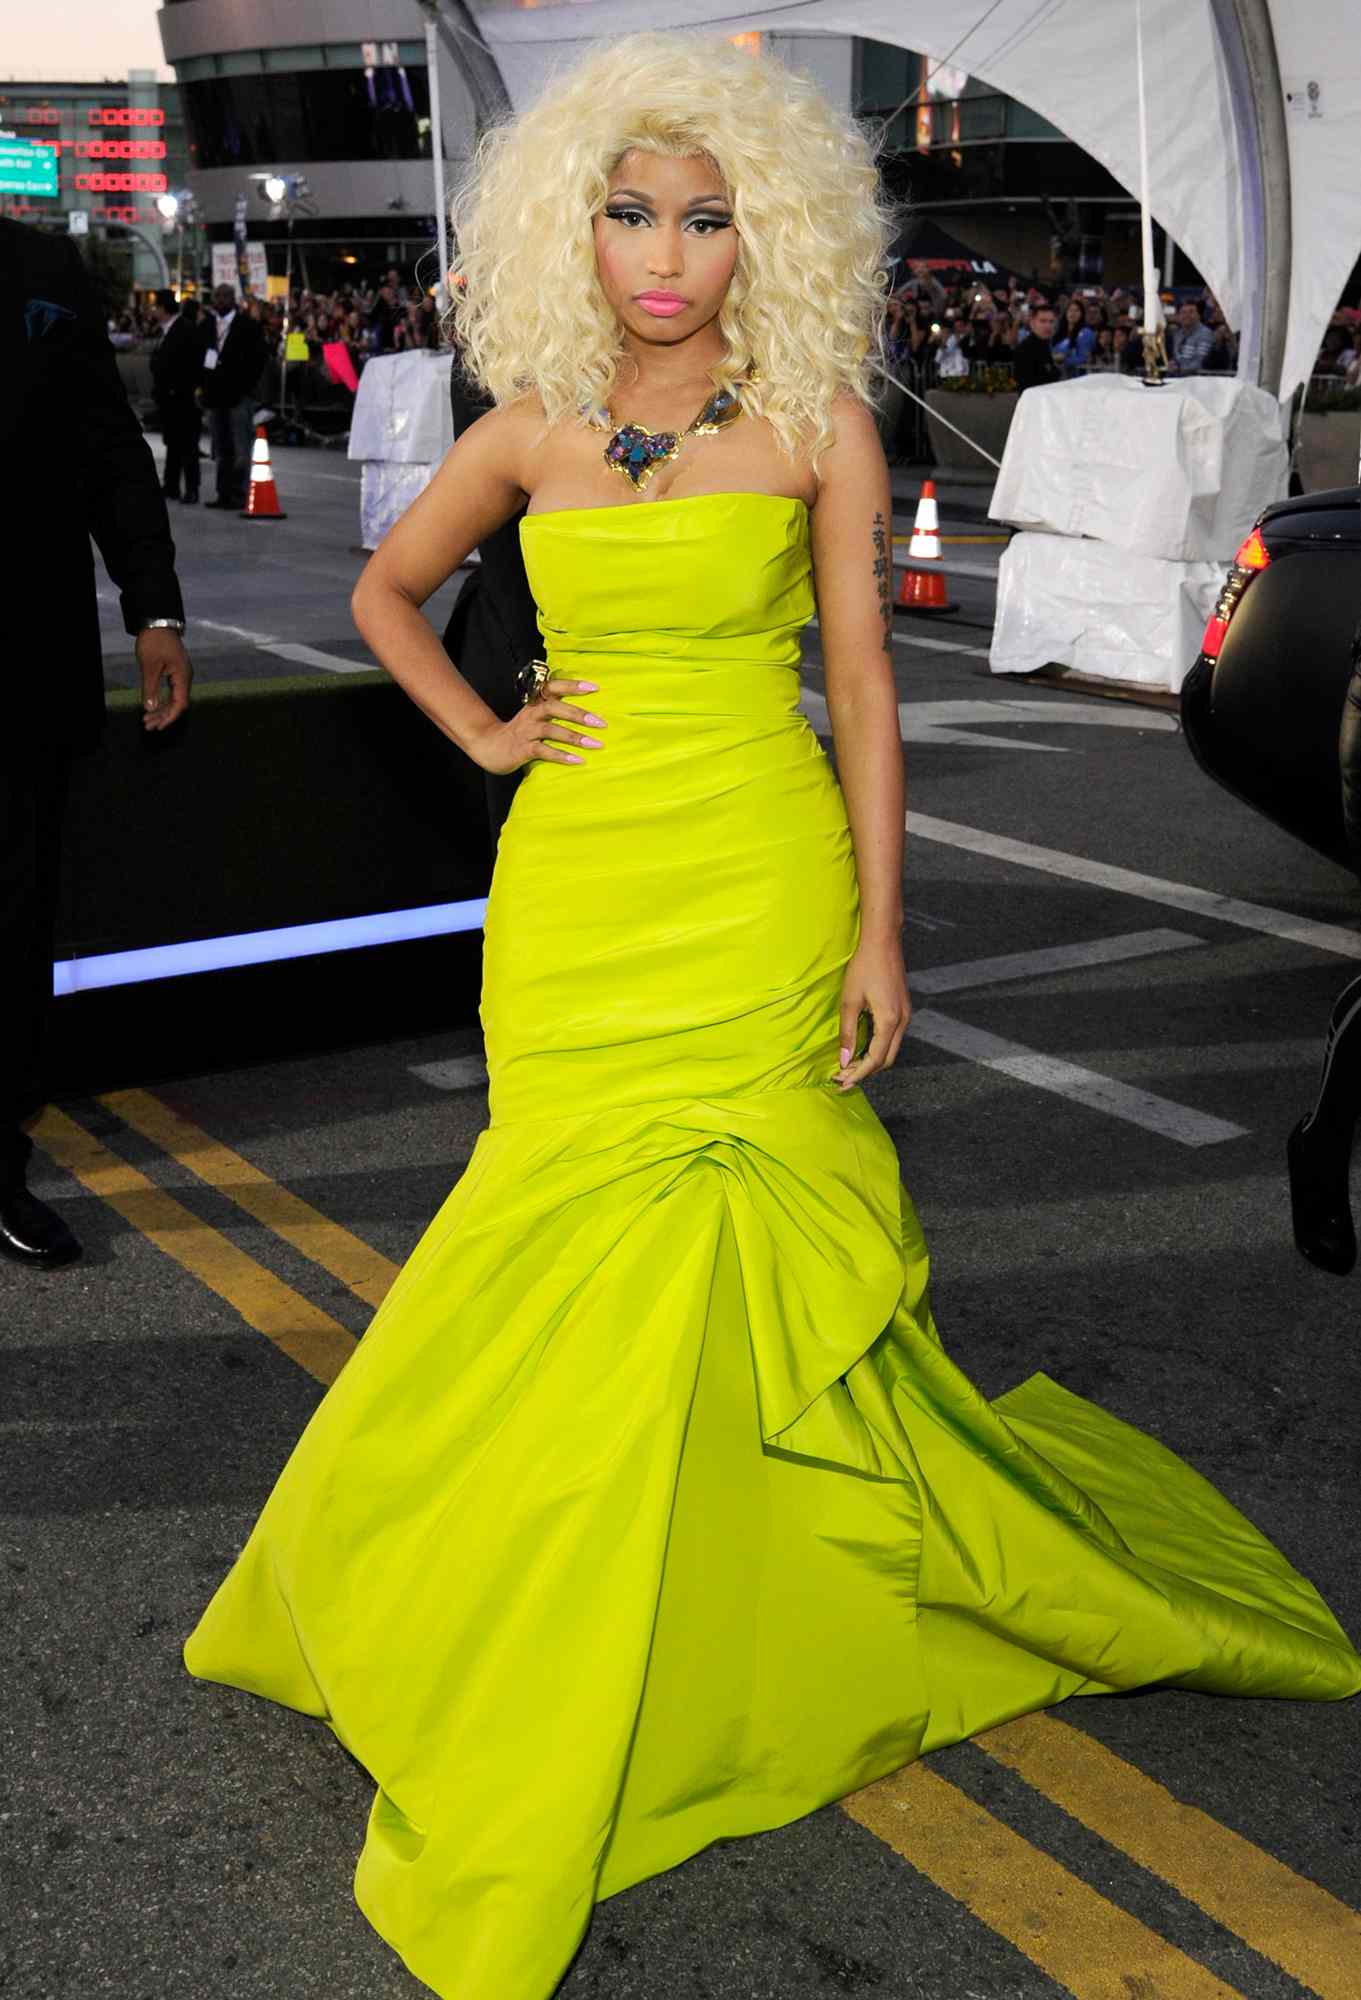 Nicki Minaj attends the 40th American Music Awards held at Nokia Theatre L.A. Live on November 18, 2012 in Los Angeles, California